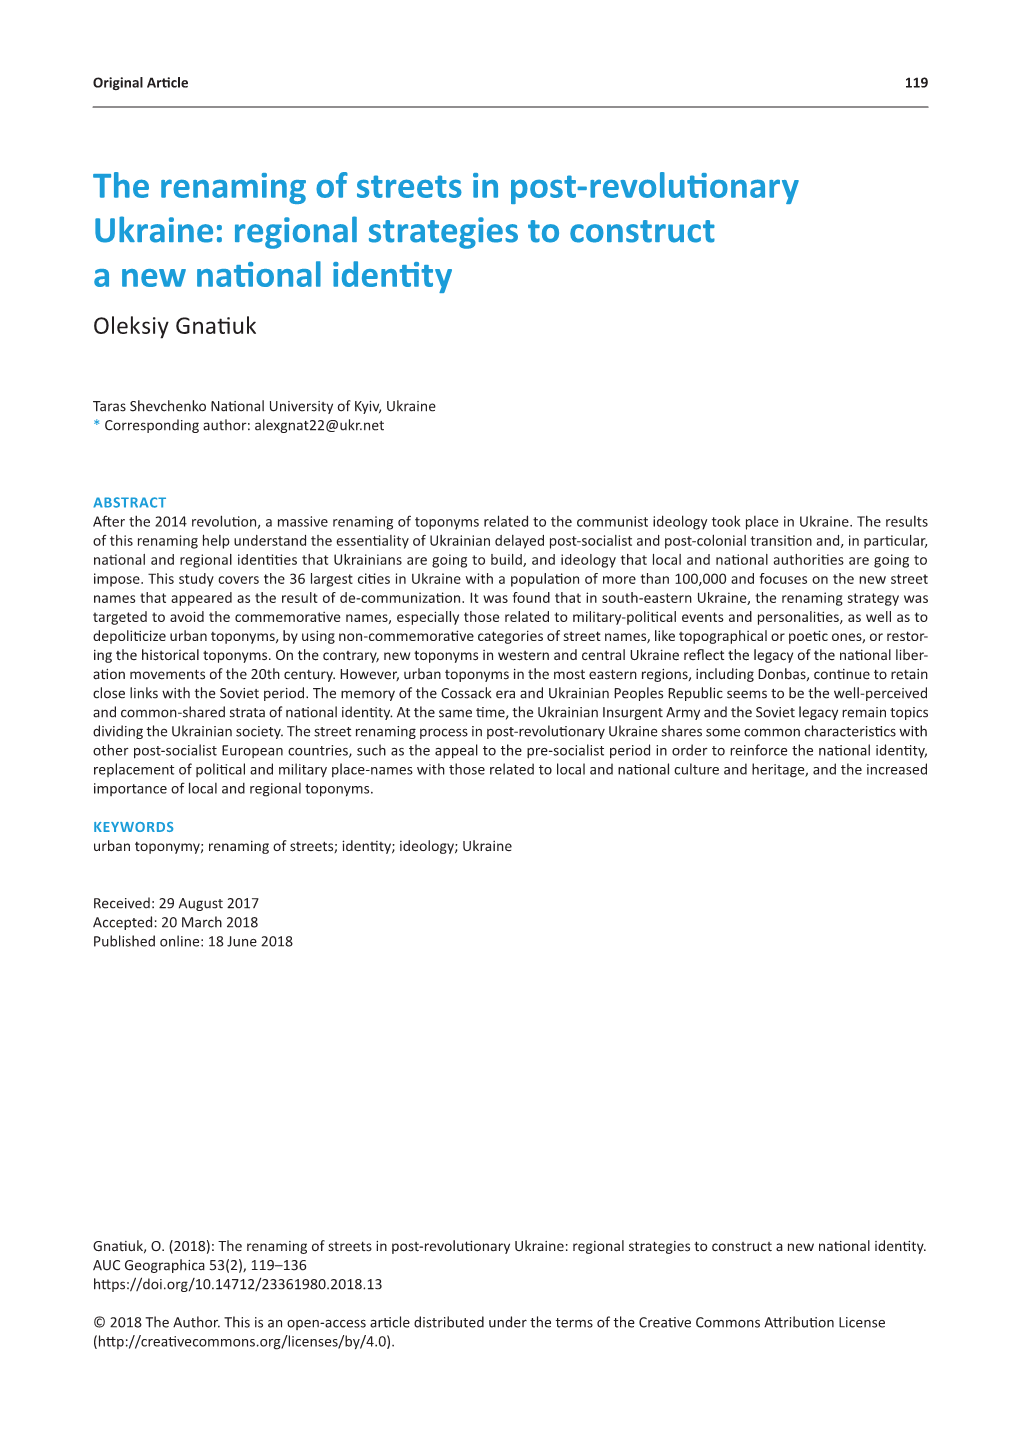 The Renaming of Streets in Post-Revolutionary Ukraine: Regional Strategies to Construct a New National Identity Oleksiy Gnatiuk